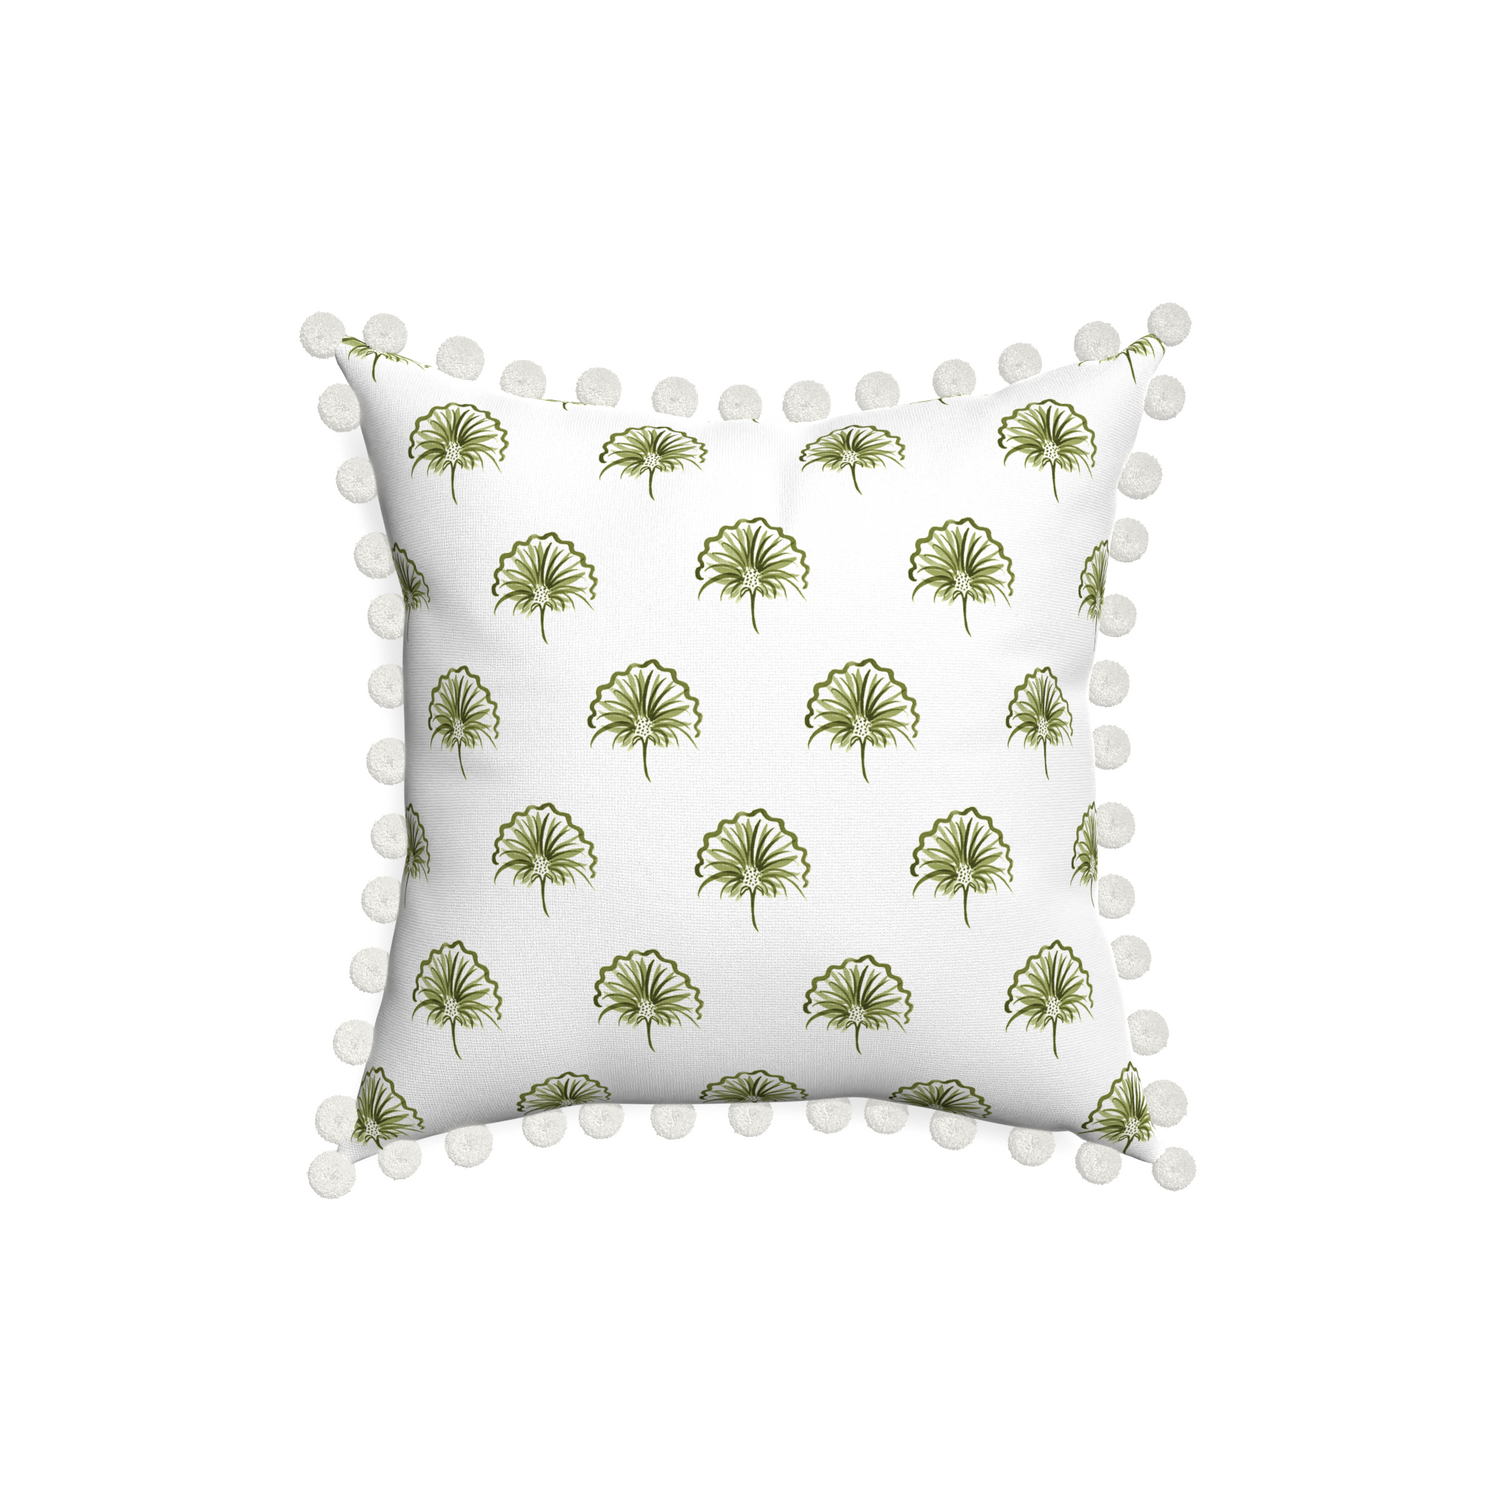 18-square penelope moss custom green floralpillow with snow pom pom on white background